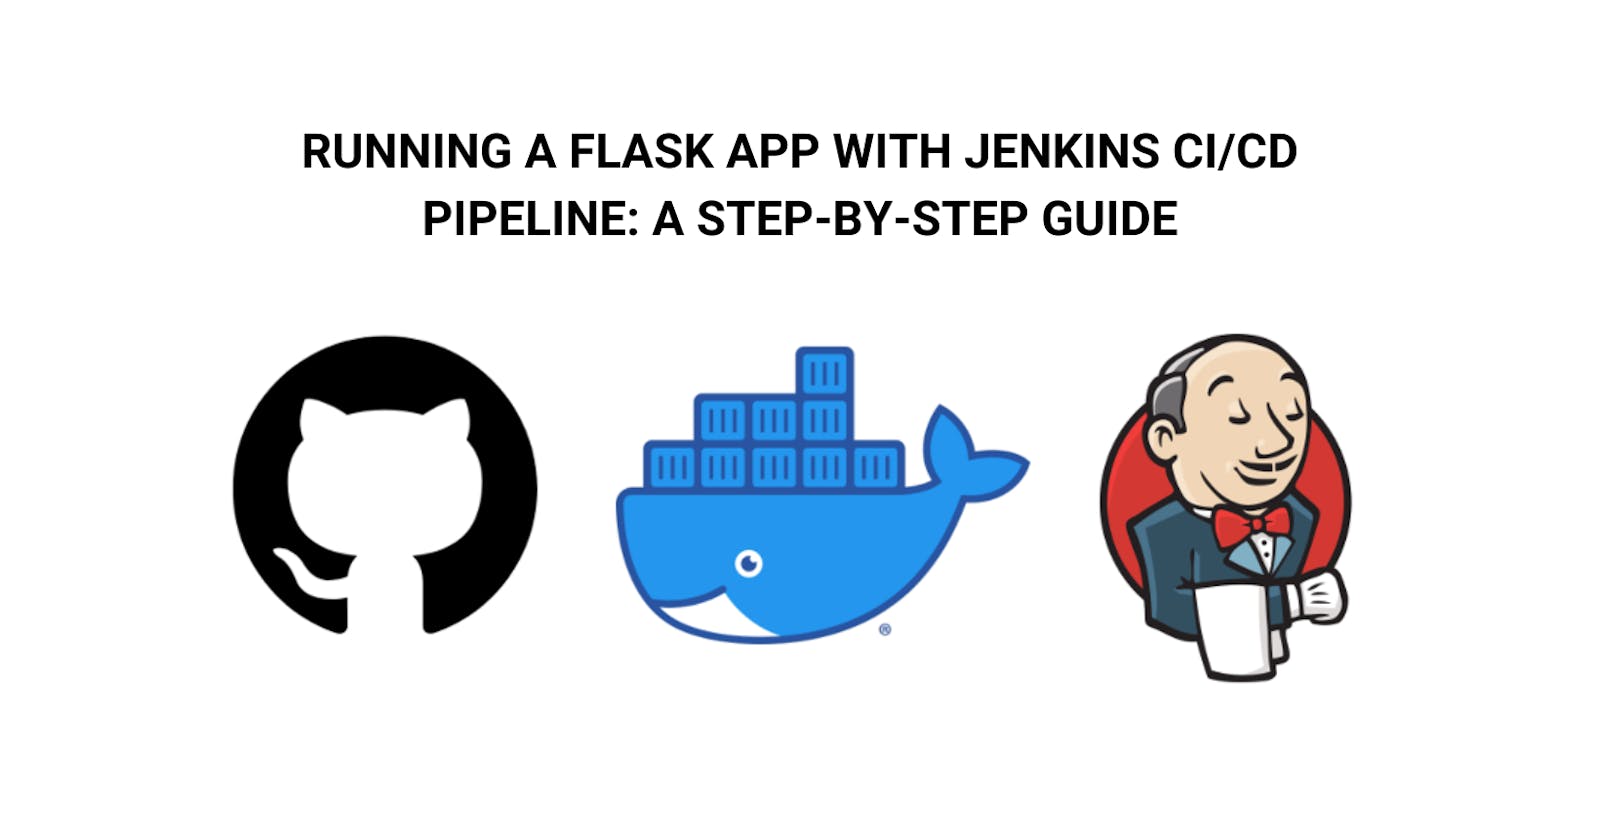 Running a Flask App with Jenkins CI/CD Pipeline: A Step-by-Step Guide